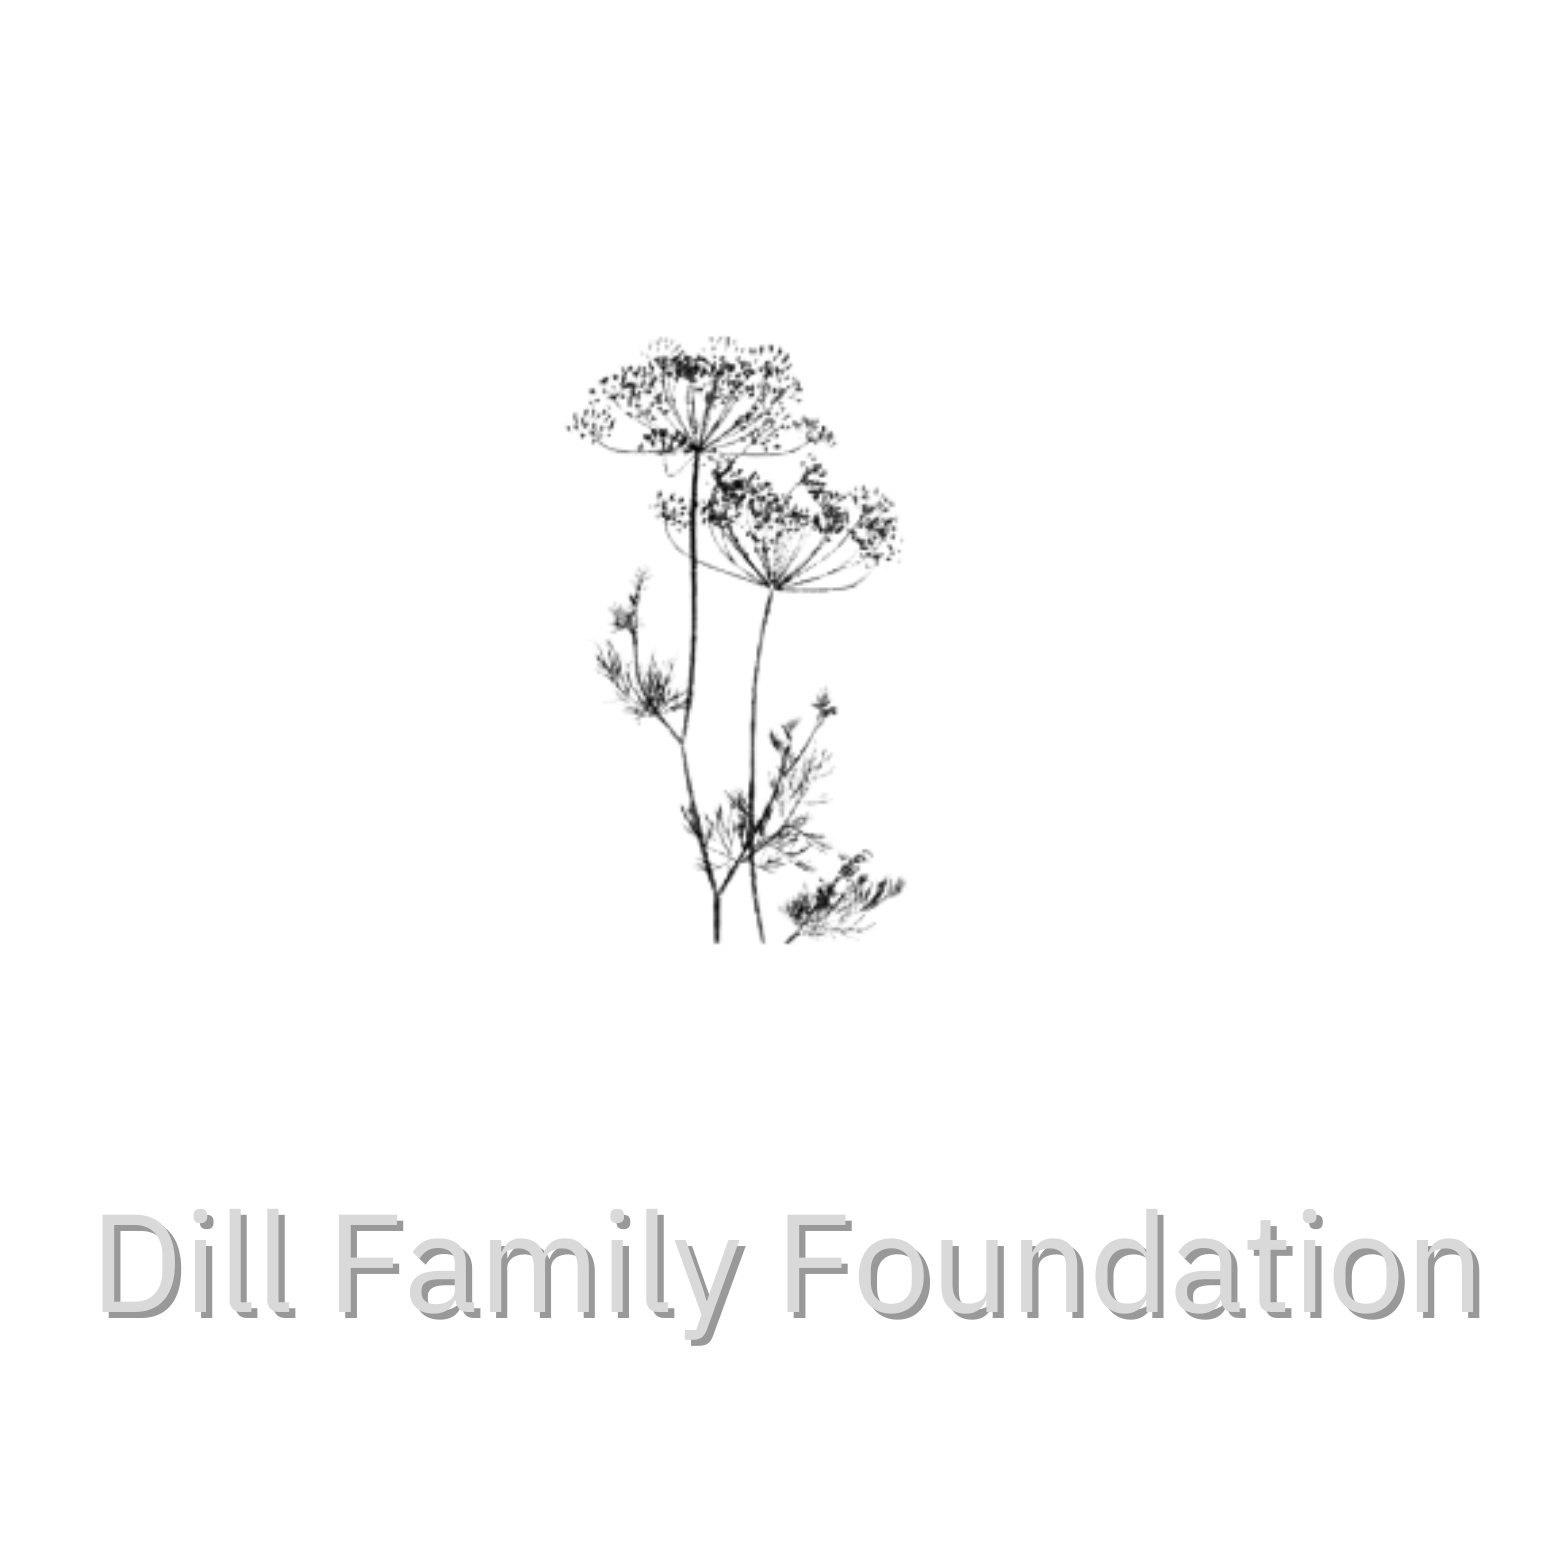 Dill Family Foundation.png